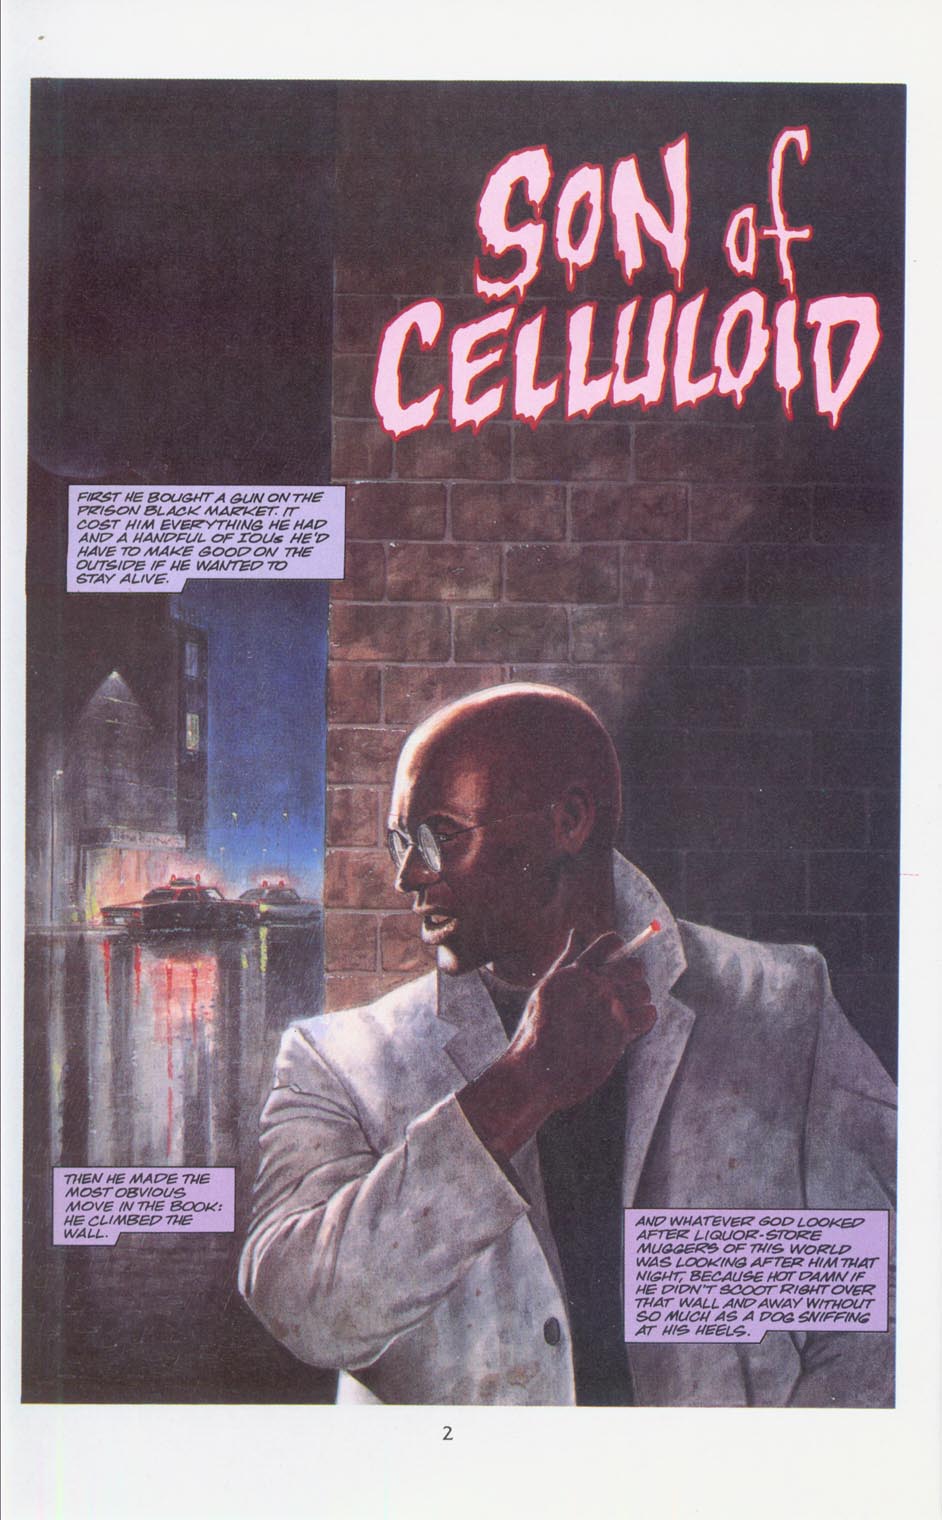 Read online Clive Barker: Son of Celluloid comic -  Issue # Full - 5